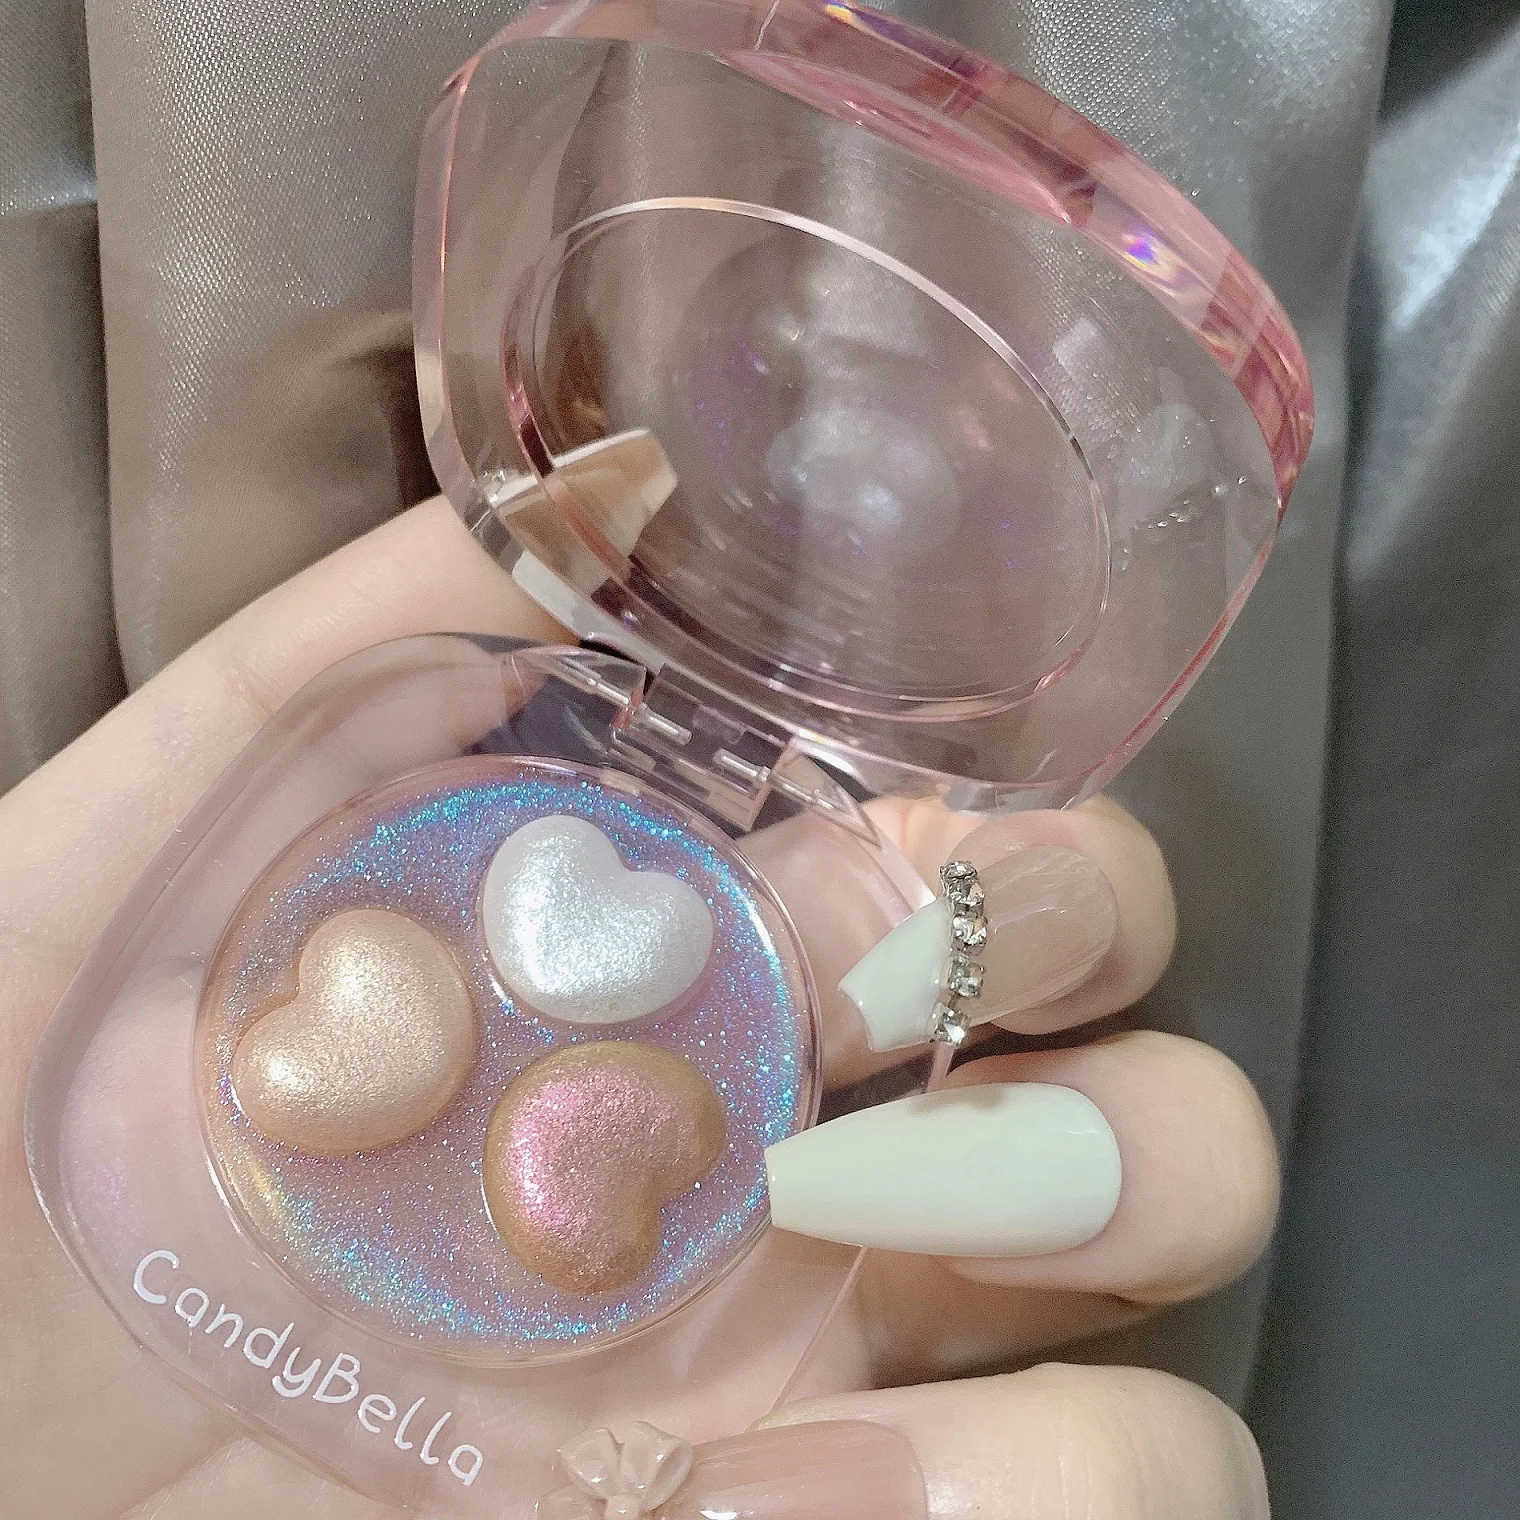 

Candybella 3 Colors Heart Shape Highlighter Eyeshadow